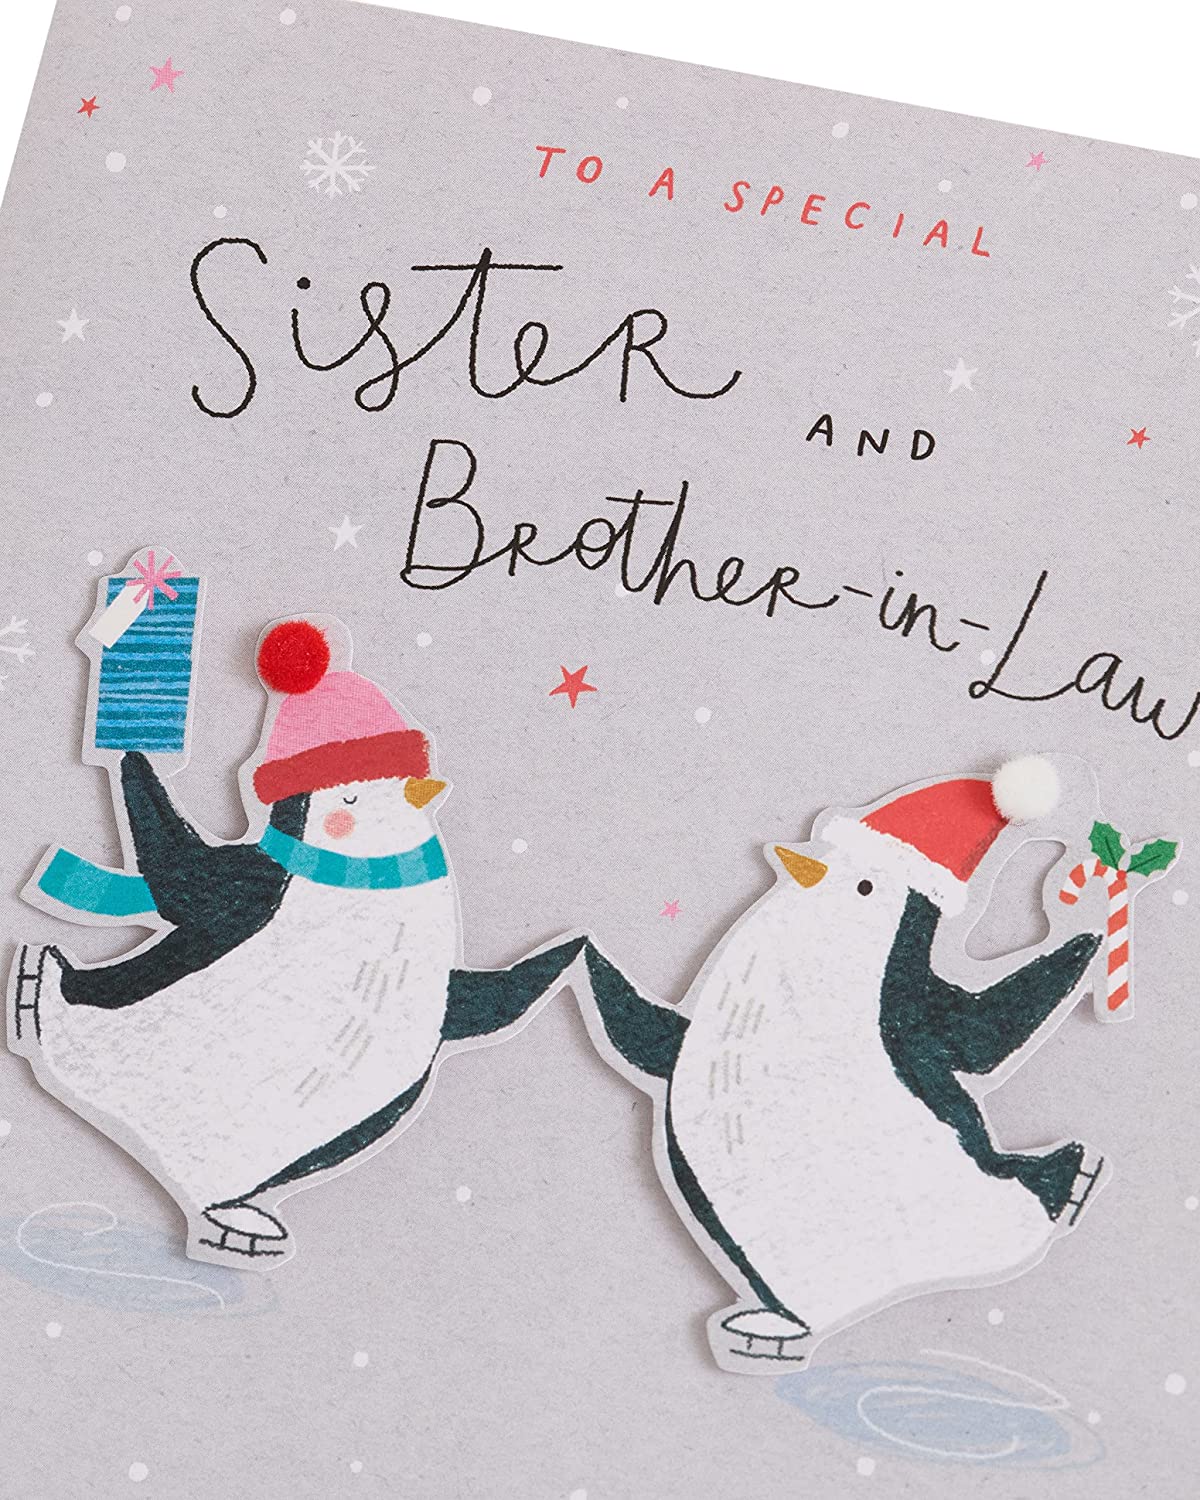 Penguins Dancing Special Sister & Brother-in-Law Christmas Card 